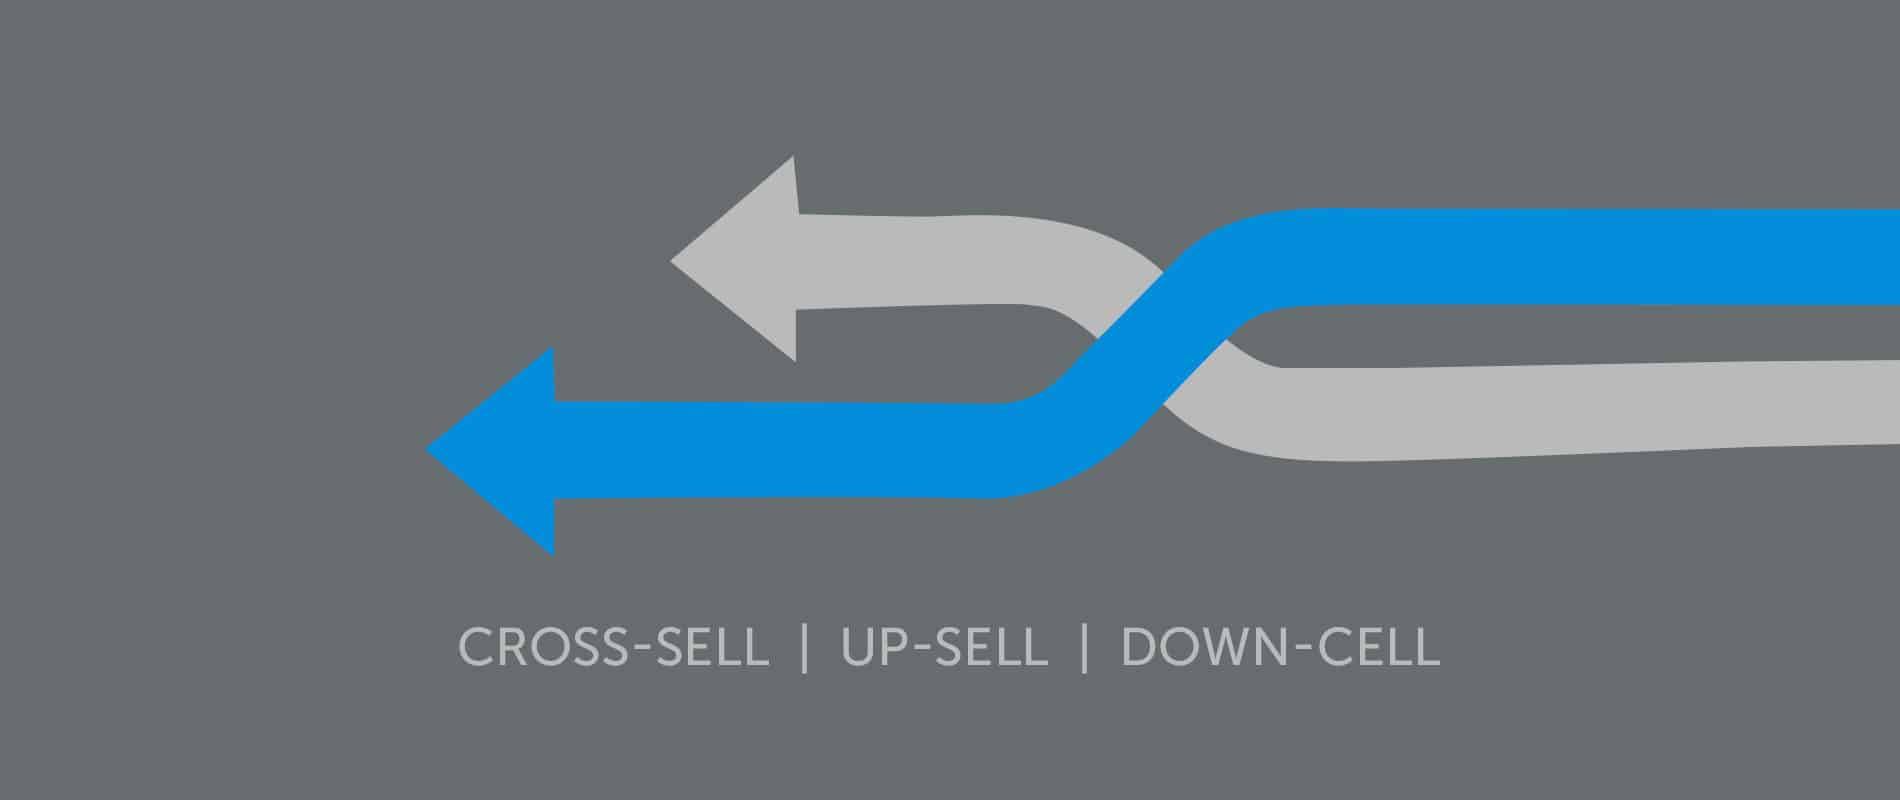 Cross-sell, Up-sell e Down-sell